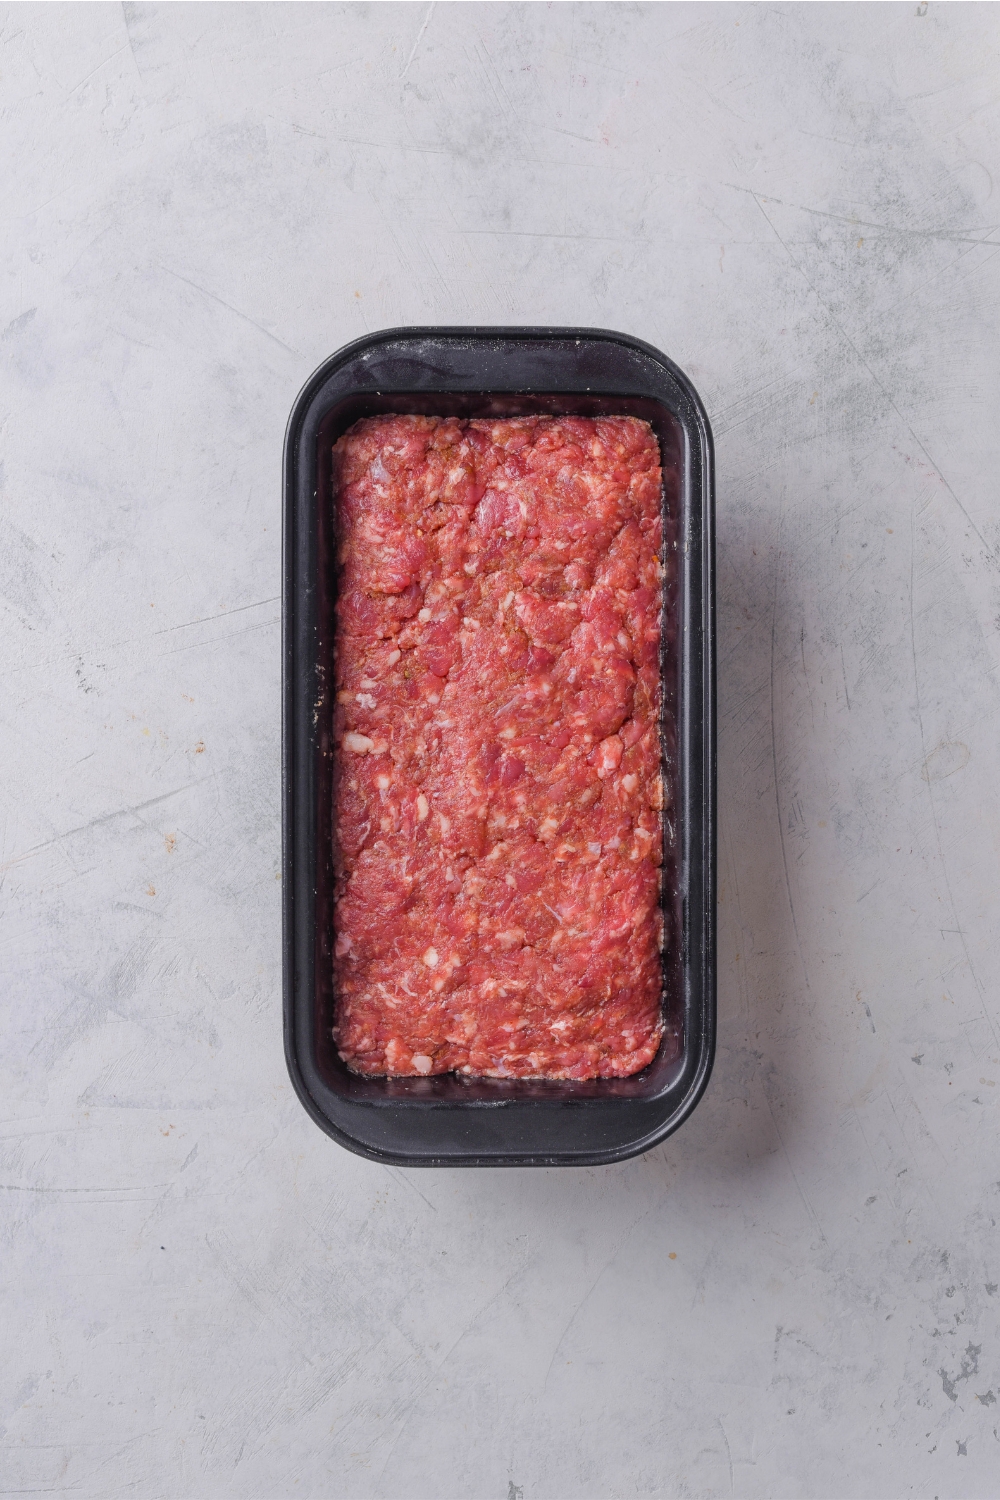 A meatloaf pan with the ground beef mixture in it.